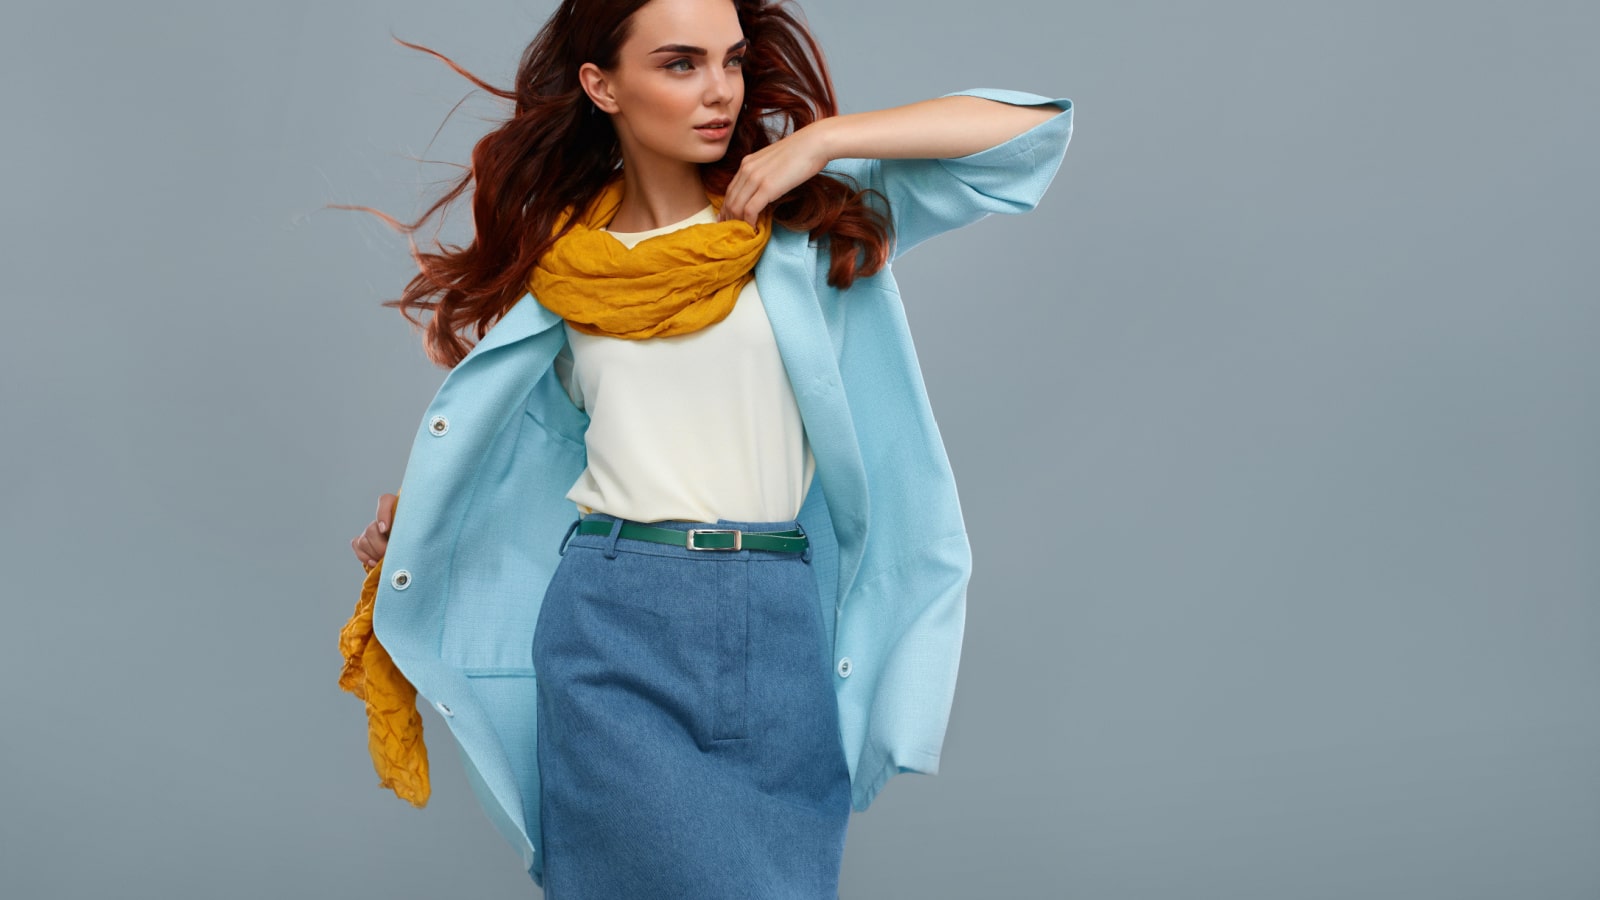 Fashion Model Girl In Fashionable Clothes On Grey Background. Beautiful Sexy Woman Wearing Stylish Clothing, White Shirt, Jeans Skirt, Light Blue Coat Jacket, Yellow Scarf In Studio. High Resolution